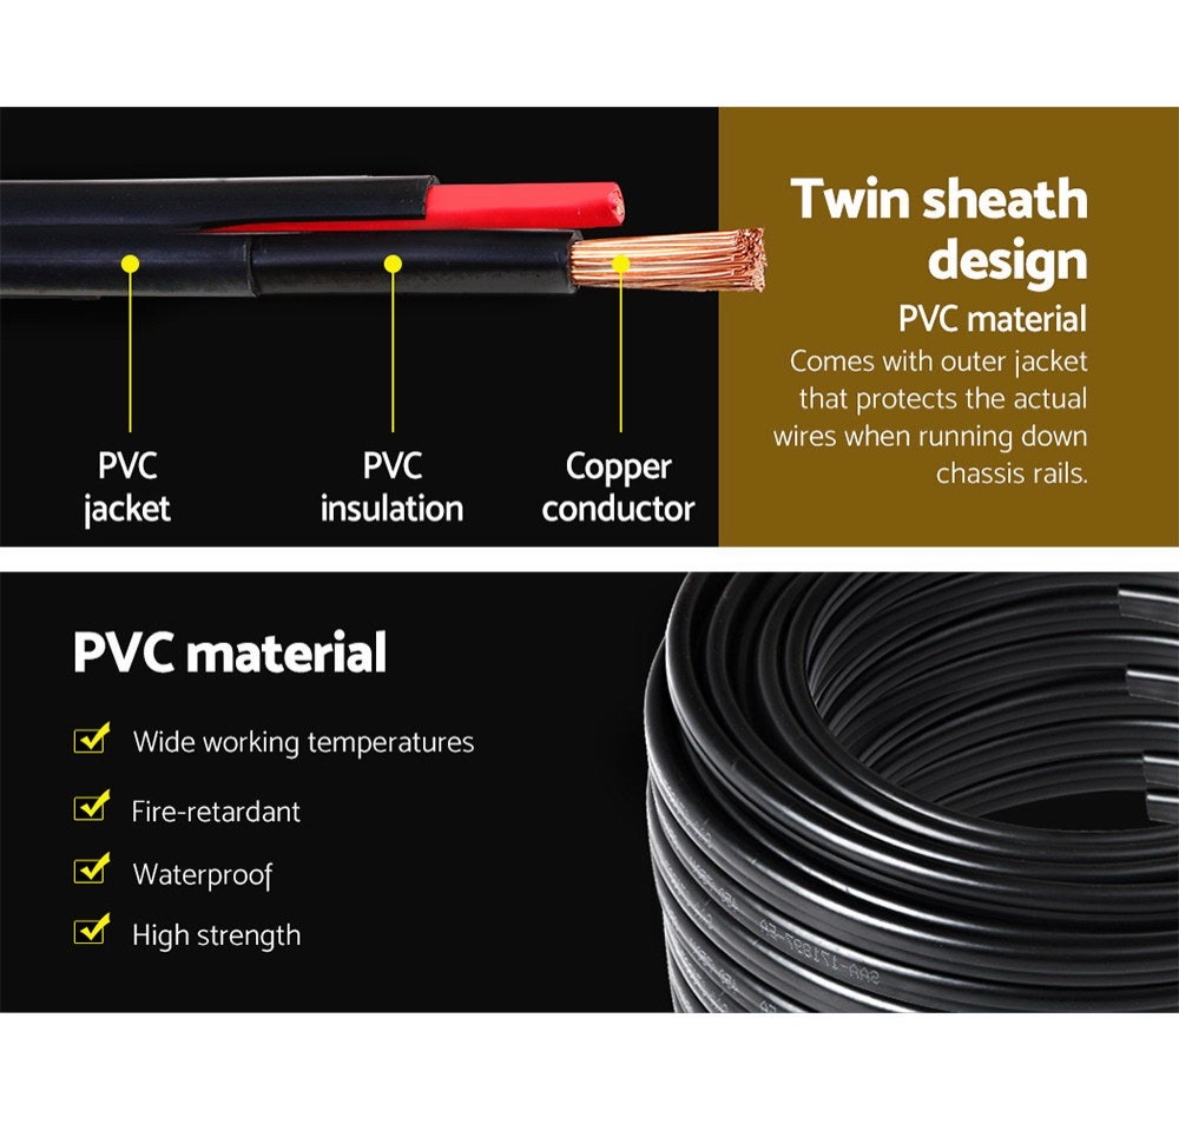 4mm * 100m twin core twin sheathed wire comprising oxygen-free copper, durable reinforced PVC cover with black sheathing. The cable is waterproof, fire-retardant able to withstand high temperature variations without losing its effective conductivity.  Specifications:  Australian Standards: SAA-certified. Conductor: Oxygen free plain copper wire to AS/NZ 1125. Insulation: V-90 PVC to AS/NZ 3808. Sheath: 5V-90 PVC AS/NZ 3808.  Voltage: 450/750V AC/DC. AMP: 22A 